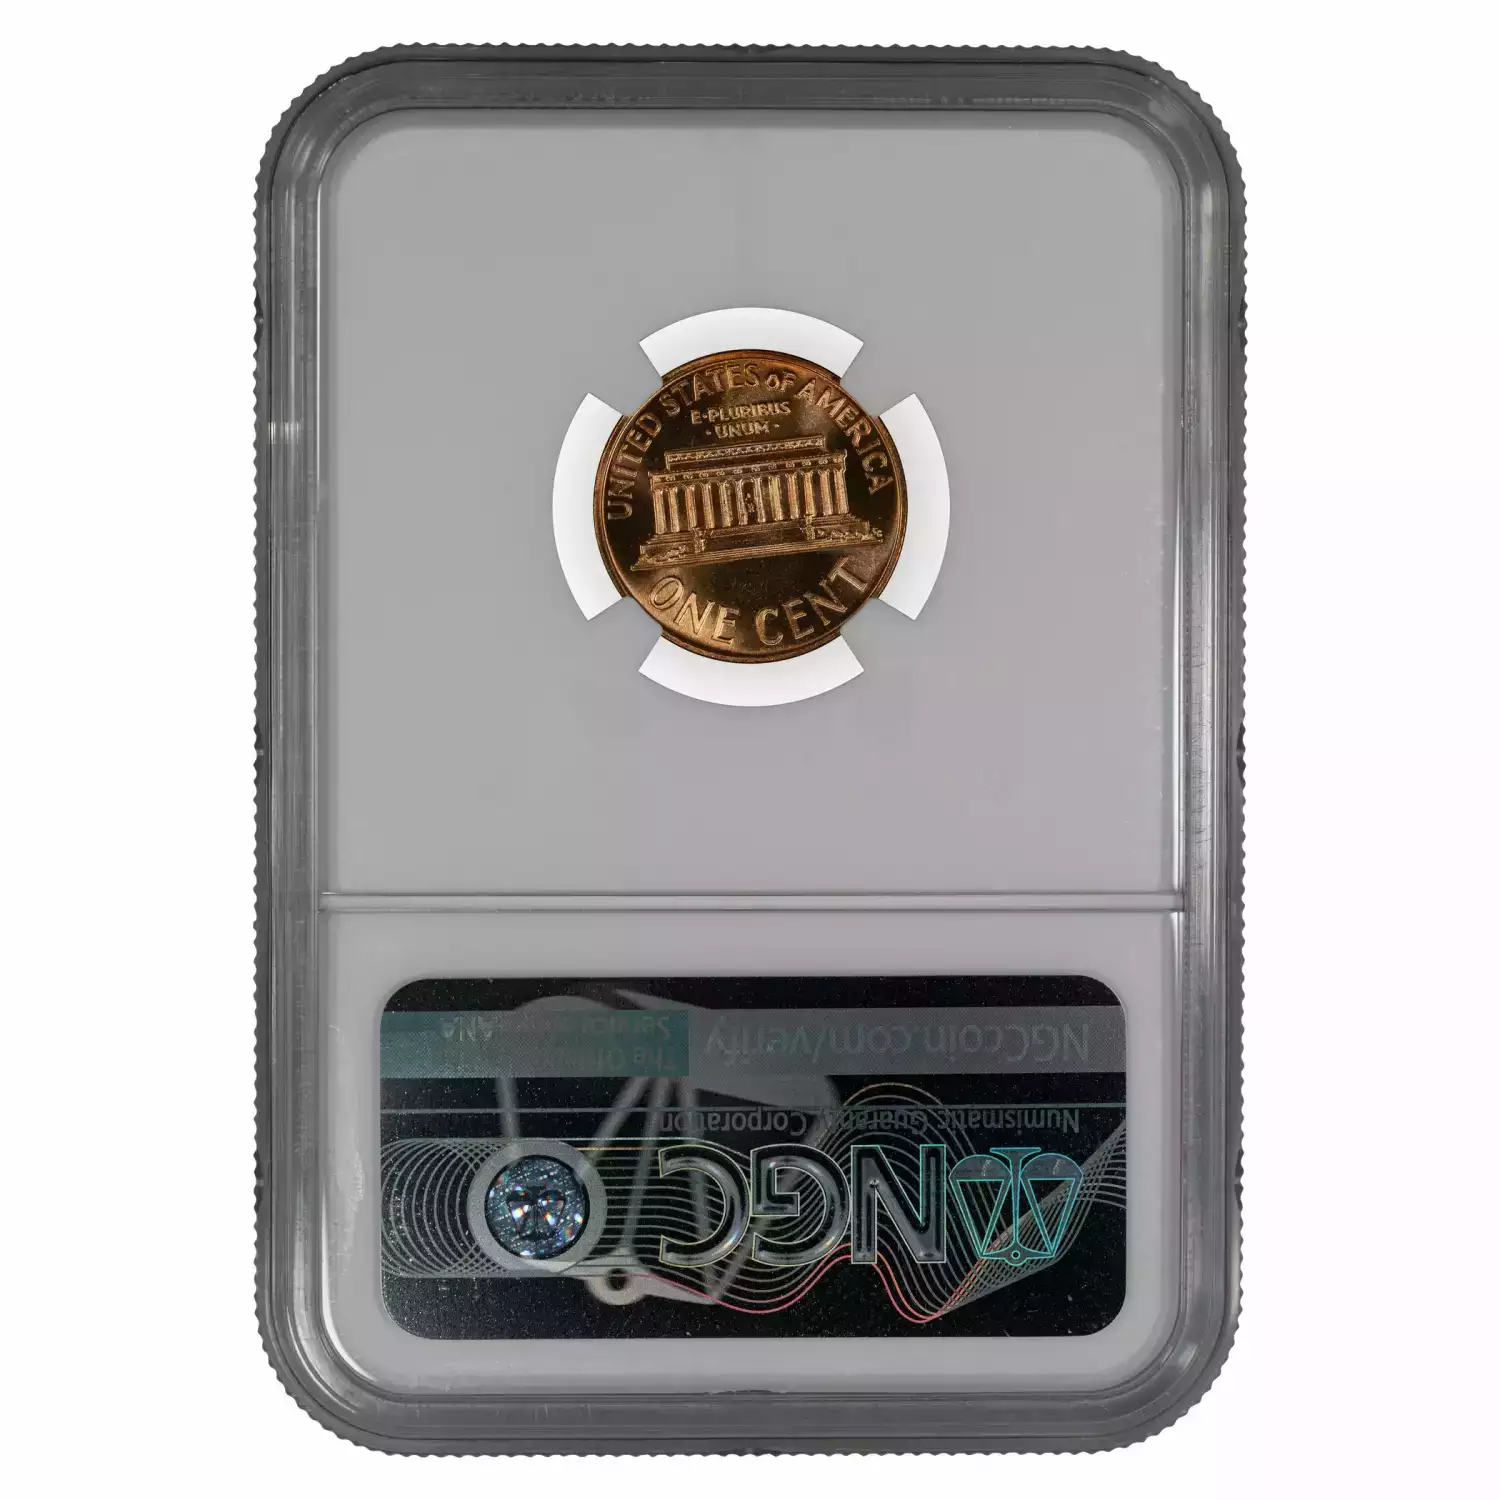 1966 SMS Lincoln Memorial Cent PCGS SP-66 RD, Buy 3 Items, Get $5 Off!!